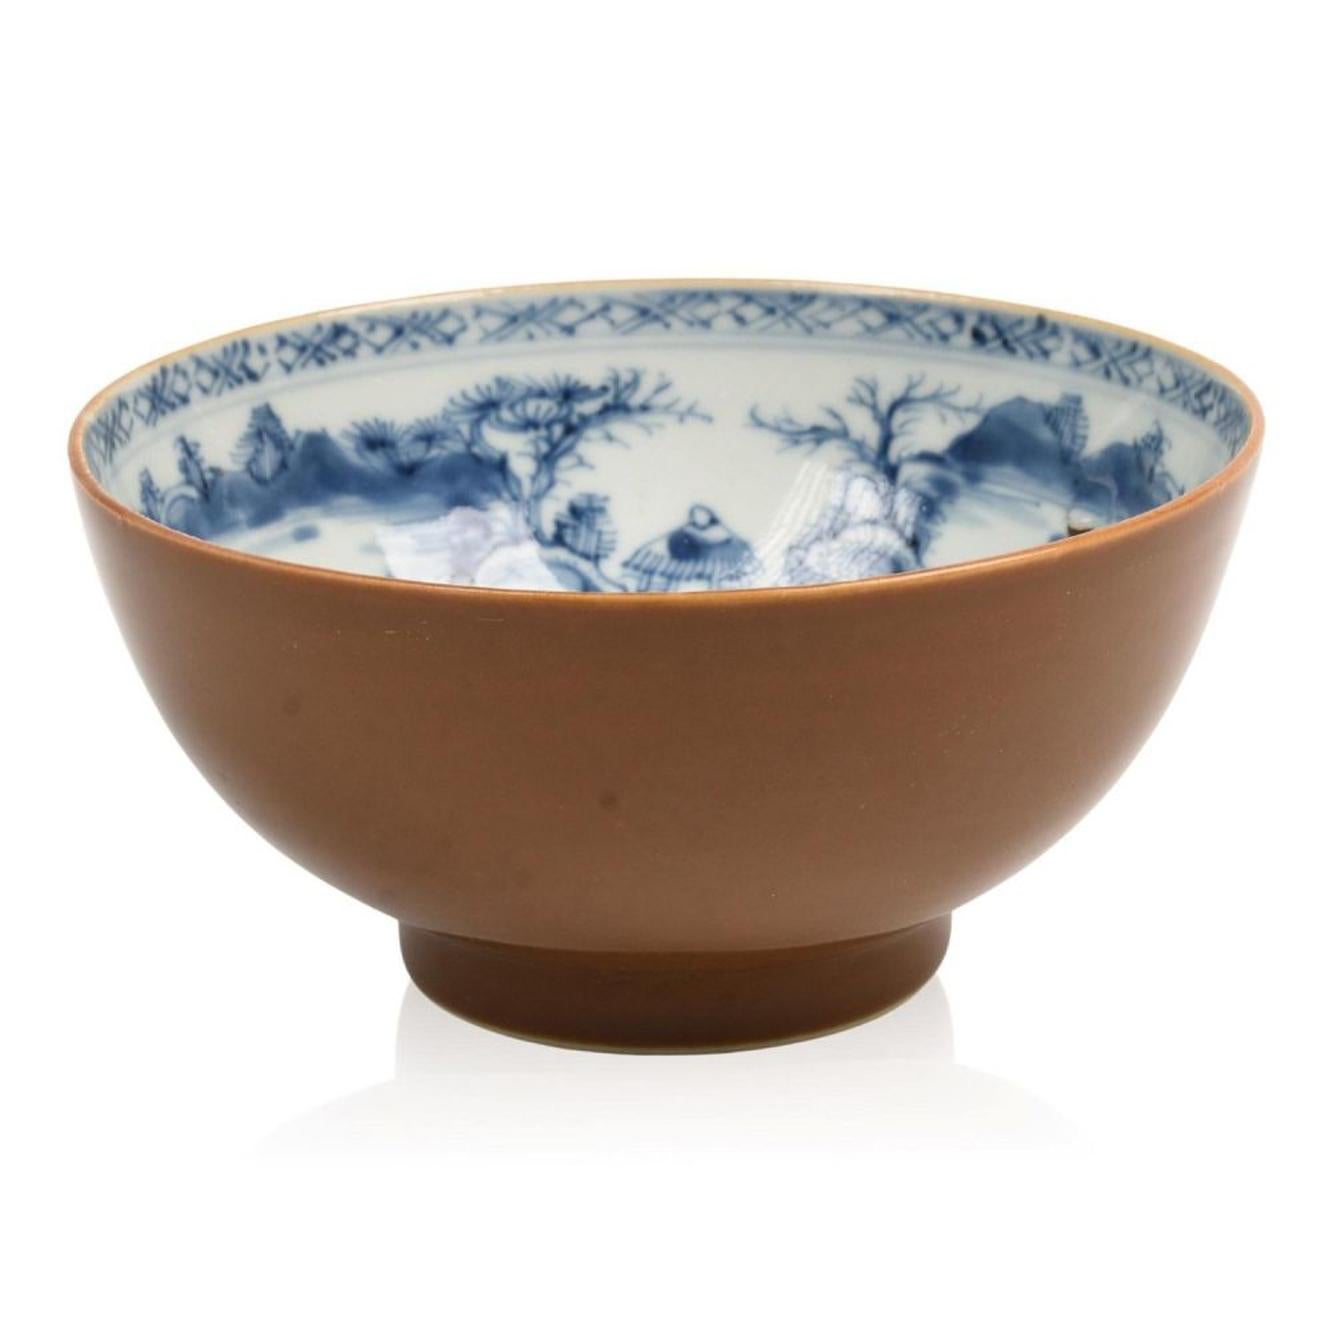 Chinese Export Porcelain Batavia-ware bowl and blue & white interior,
Nanking Cargo,
Circa 1752

The Chinese Export Batavia-ware Bowl from the Nanking Cargo is decorated on the interior with blue and white painting with Chinese buildings amongst